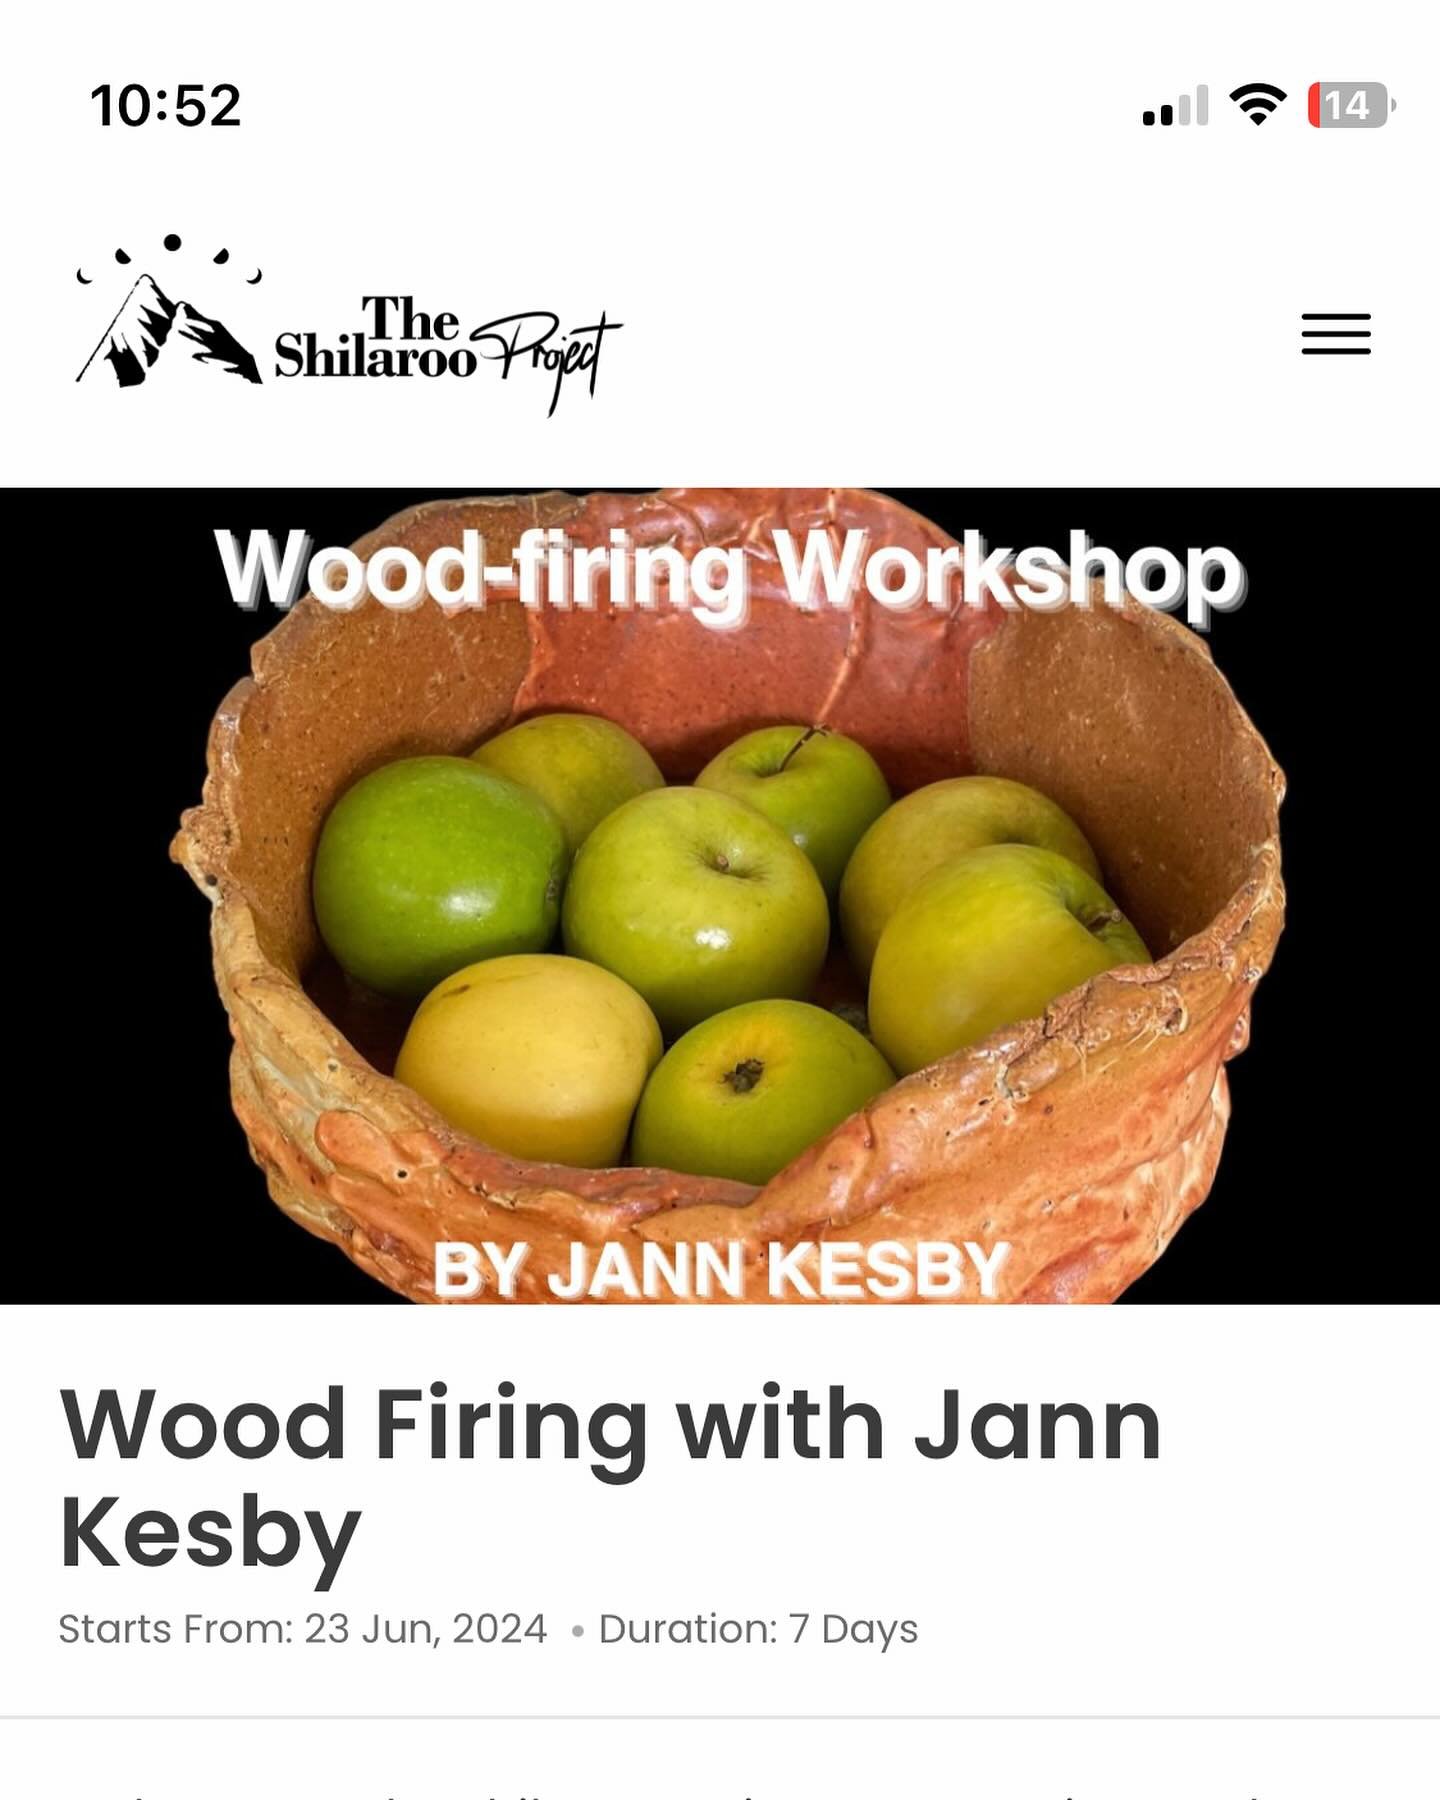 If you have any interest in wood firing &amp; visiting Himachal Pradesh northern India where the Himalayan Mountains reach for the skies please come &amp; join me... 
.
#handmade #terroir #woodfired  #australianceramics  #keramic #womenwhowoodfire
#f